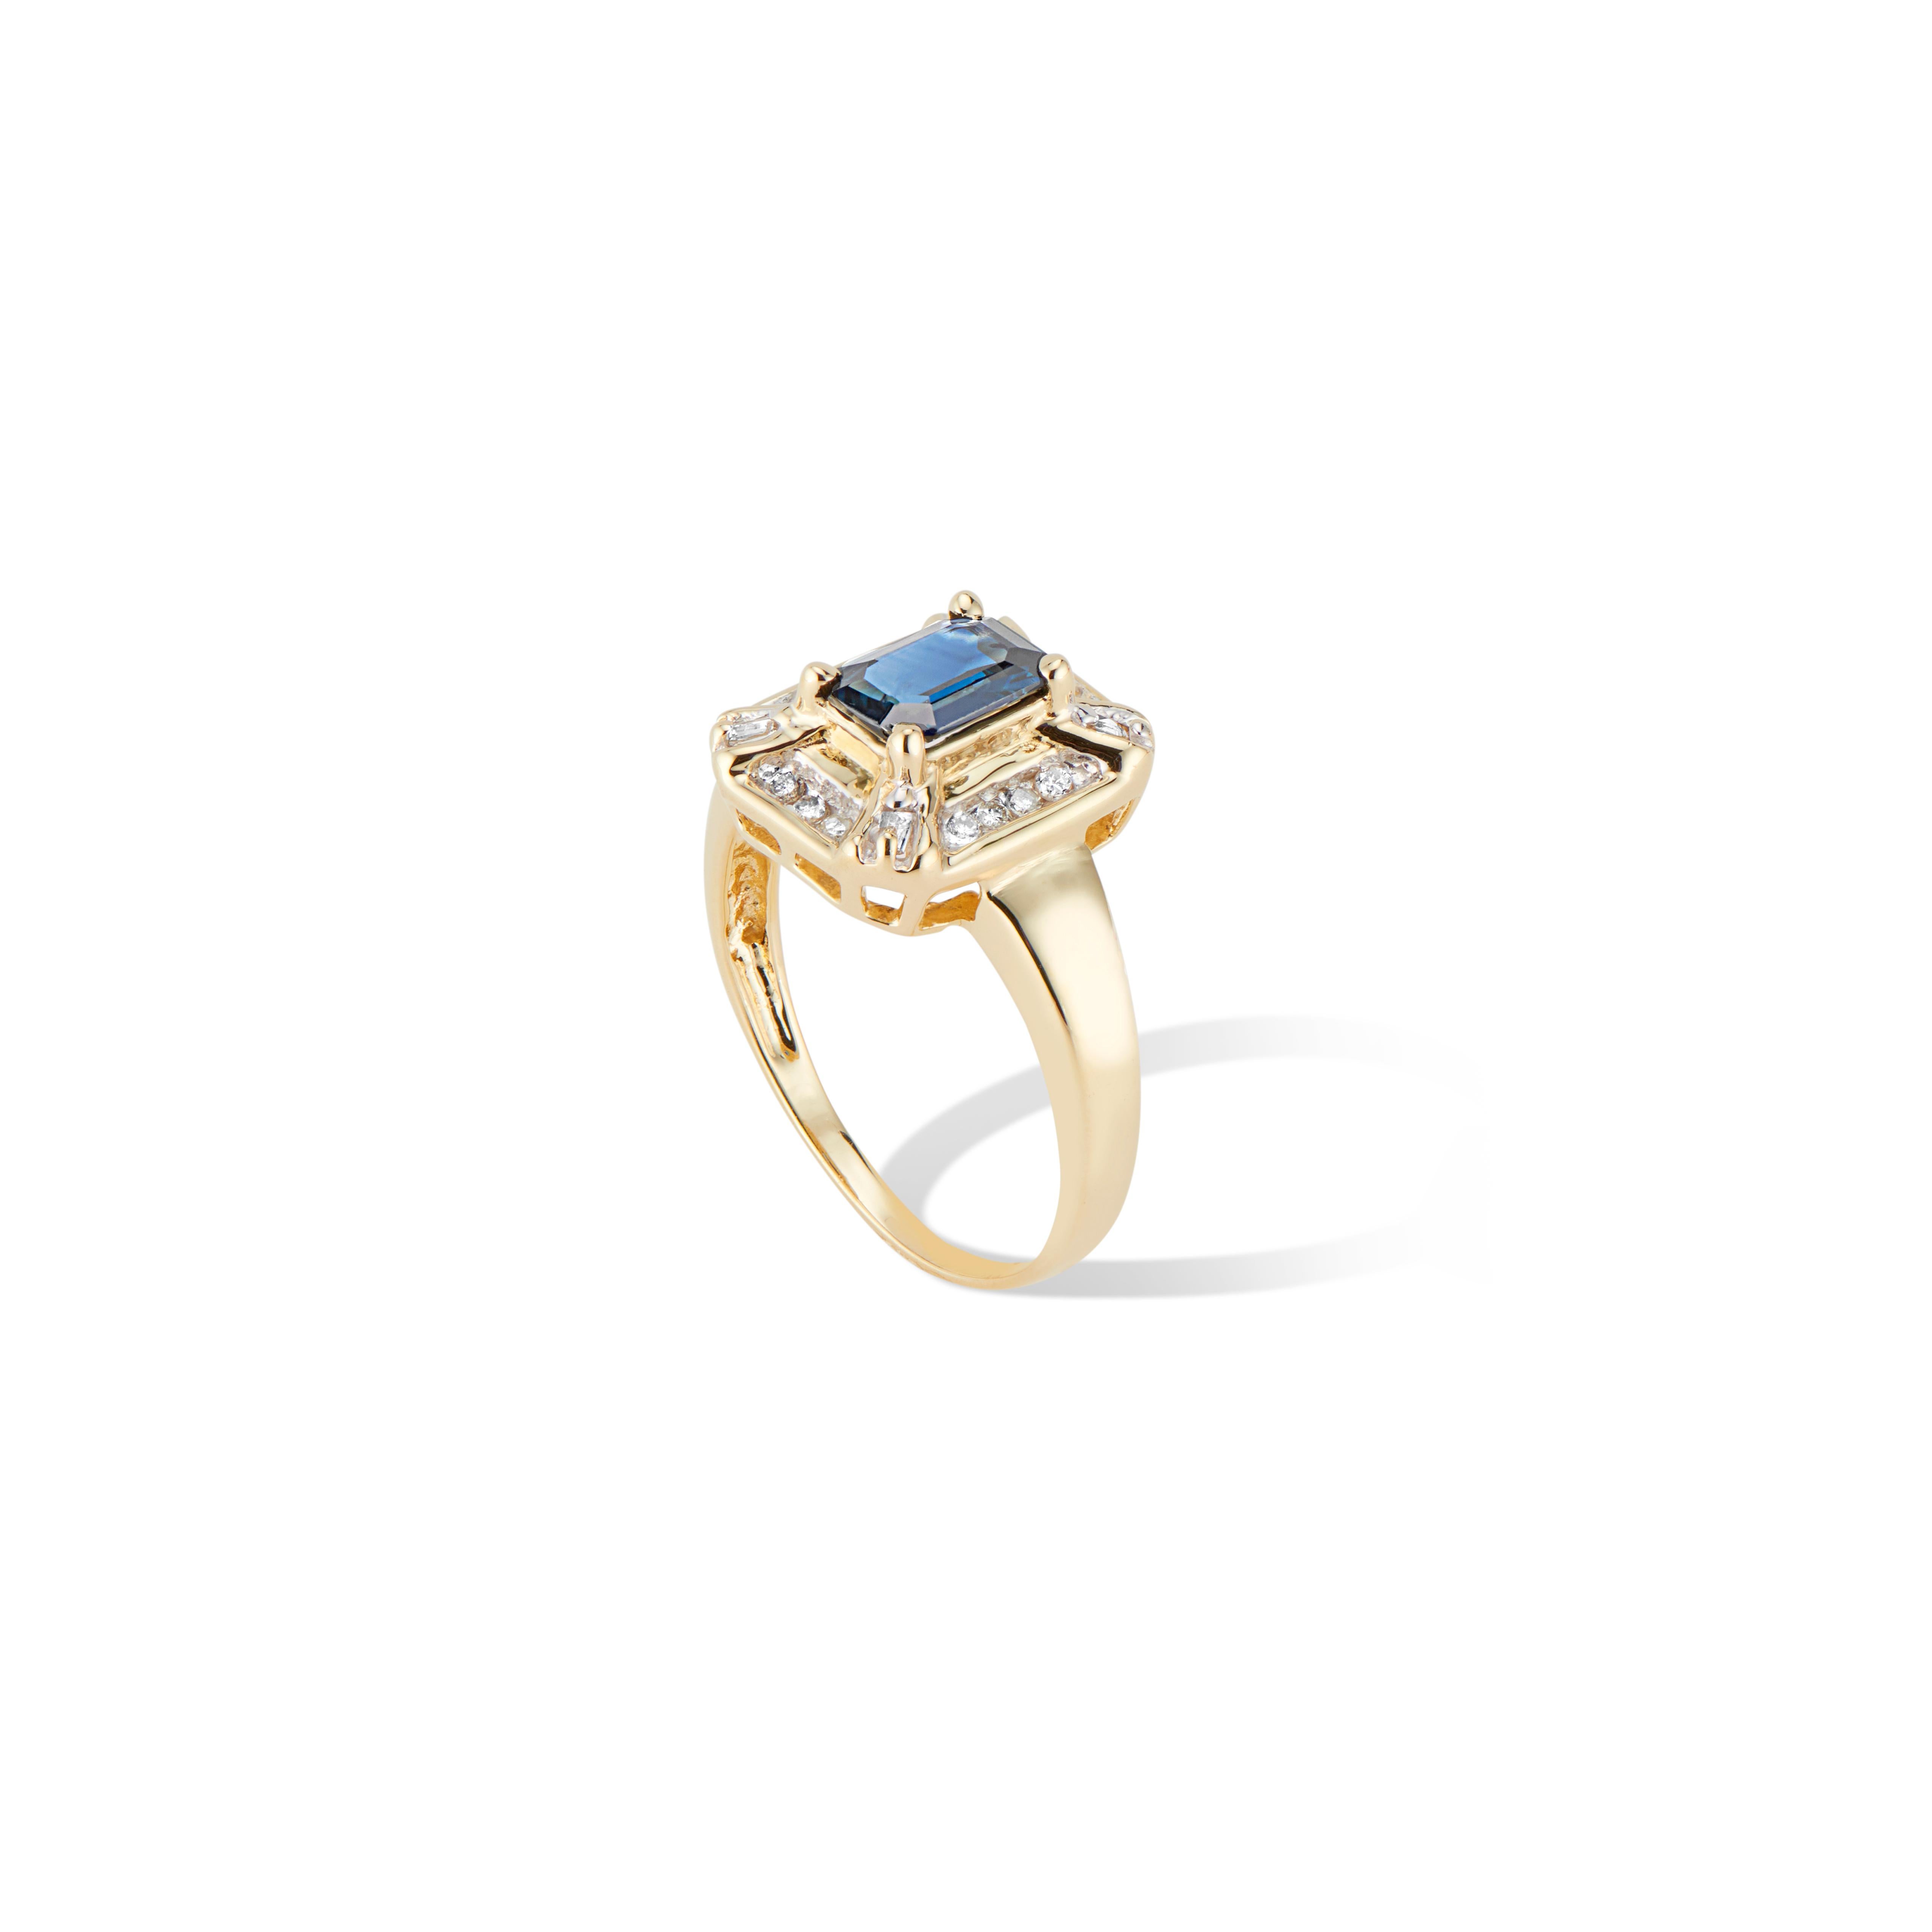 One of a kind Vintage ring from the 1970’s featuring the signature linear baguette, round diamonds and a raised Emerald cut sapphire center stone.
This was the disco era and yellow gold chunky designs were the style.
The intense blue of this 1ct